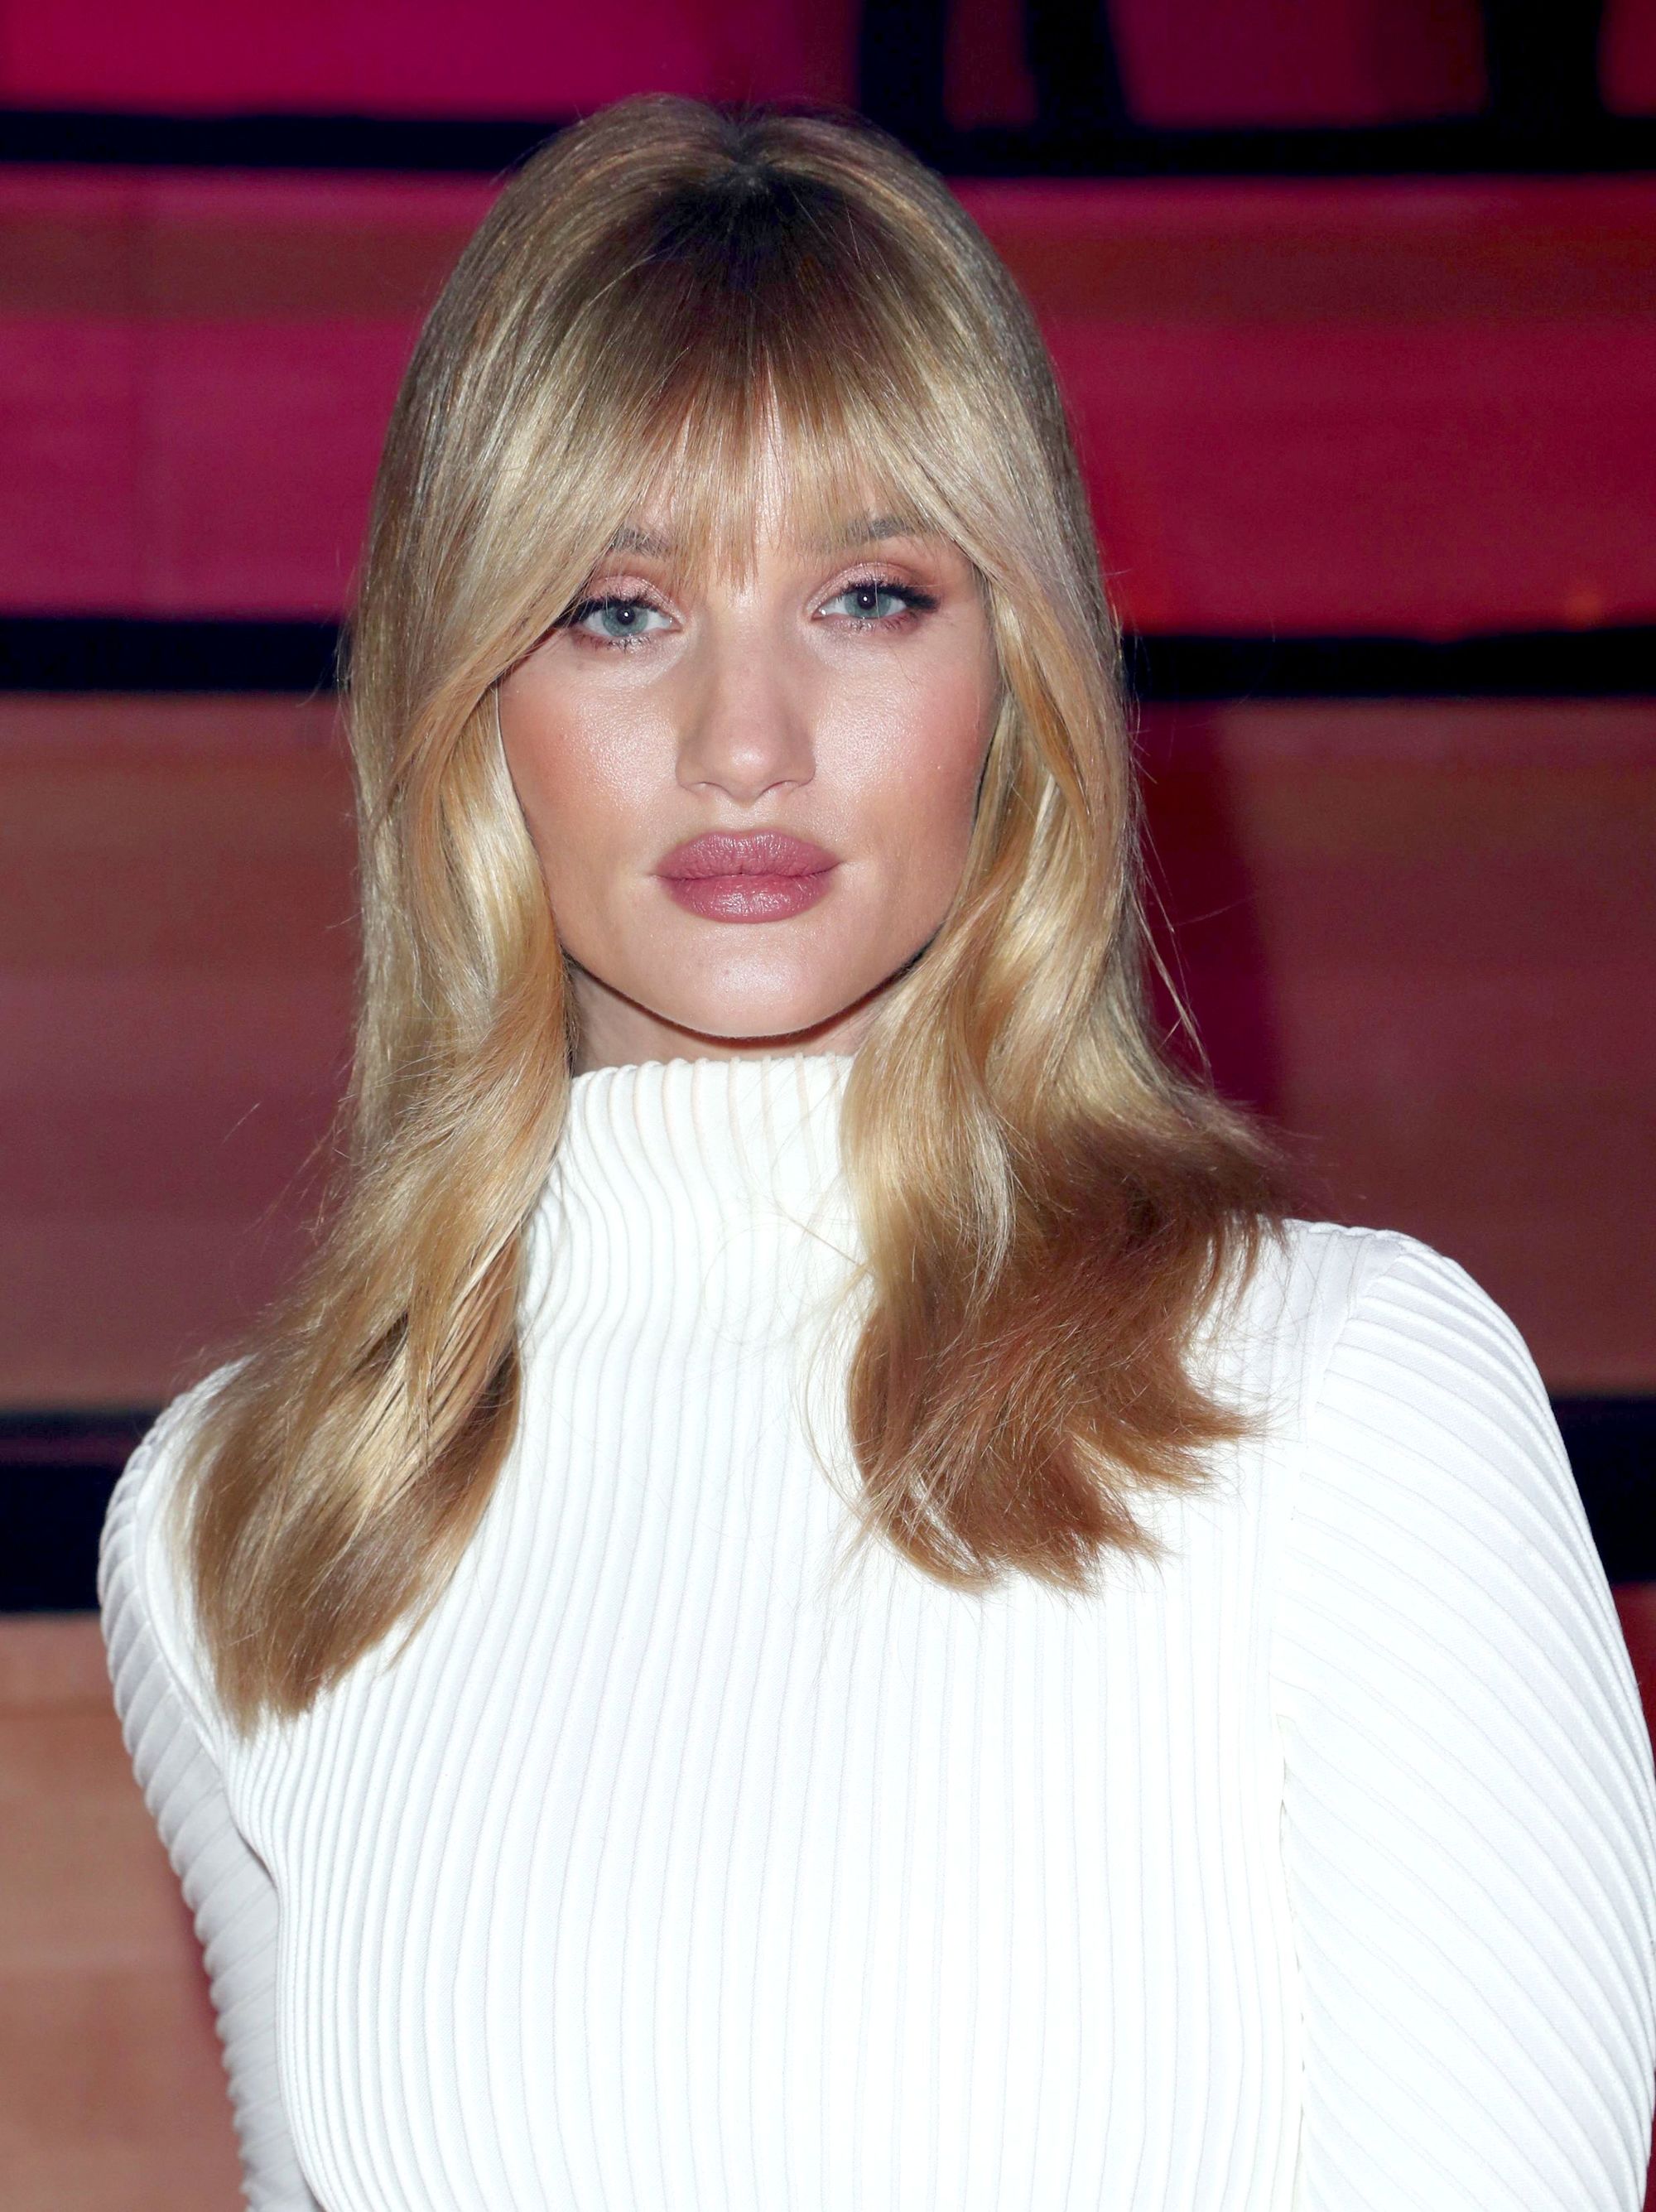 Champagne blonde: Hair inspiration gallery for this bubbly, new trend